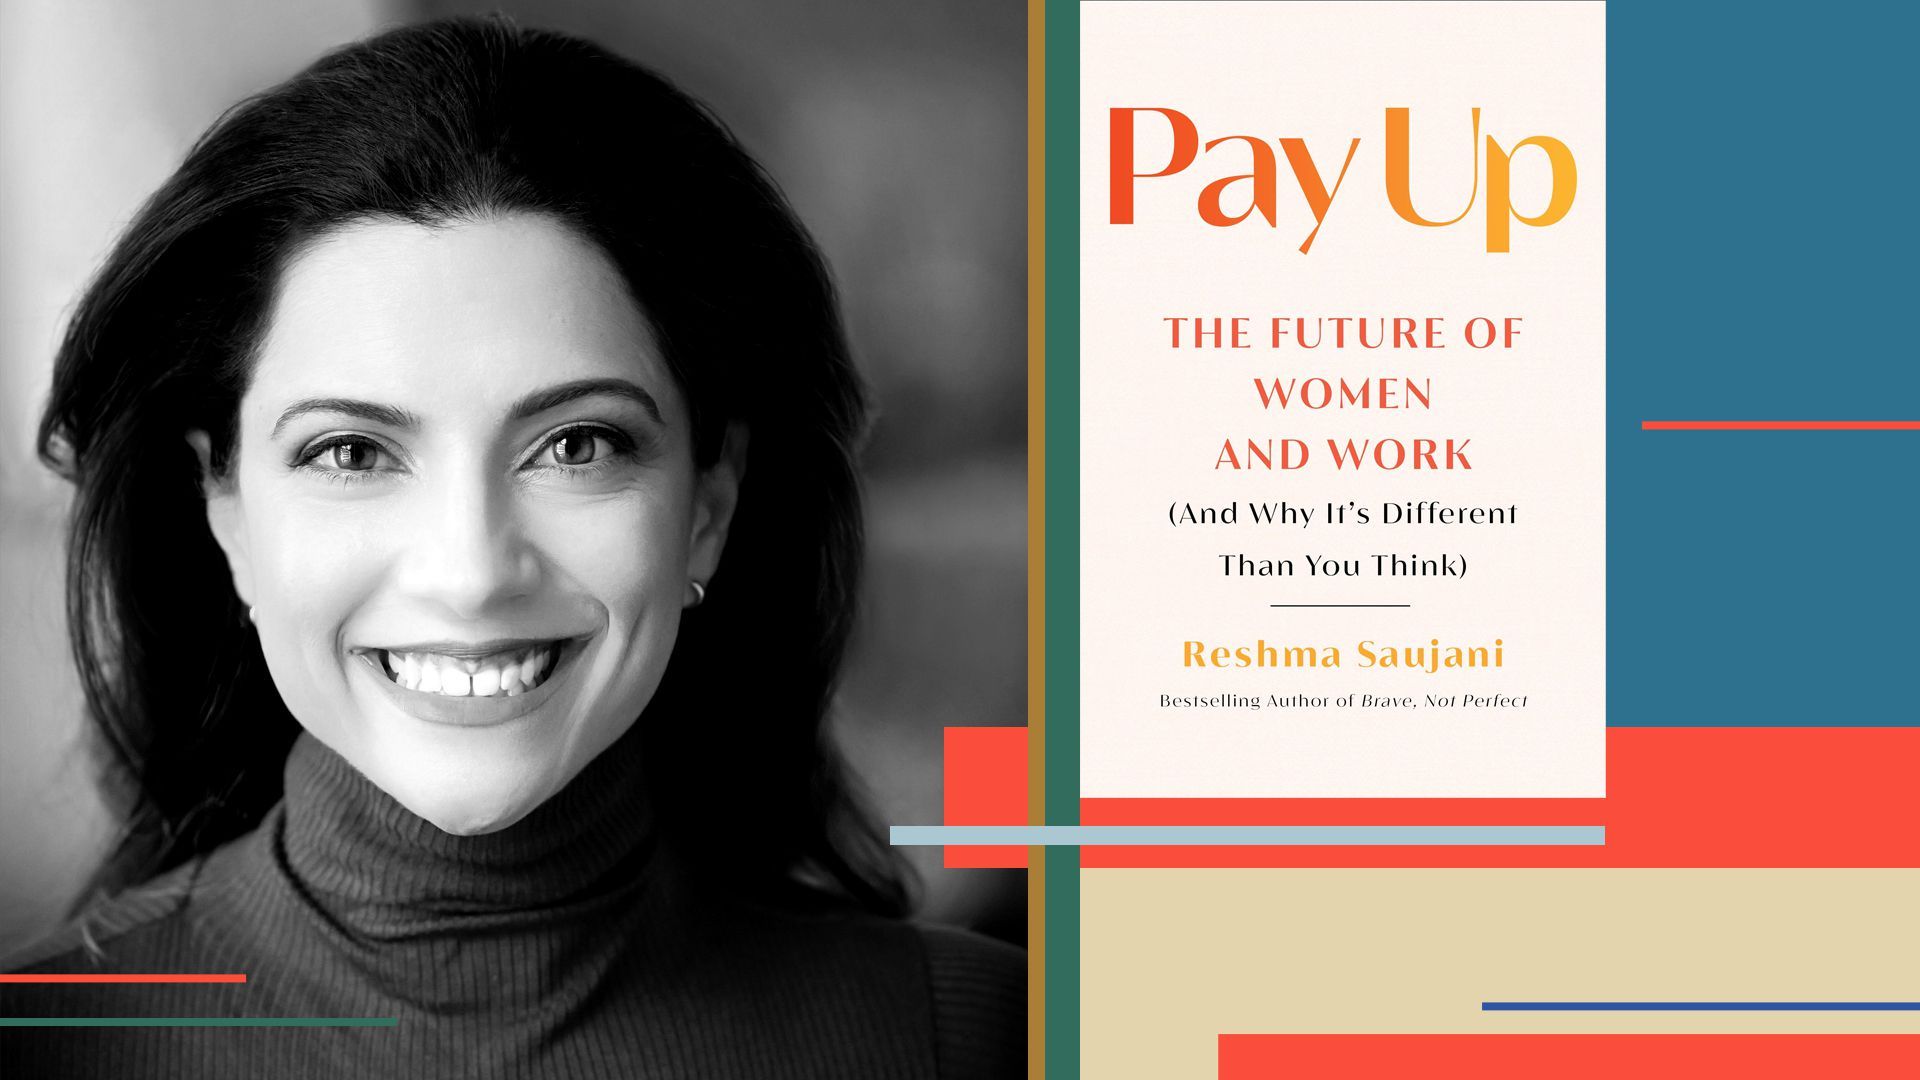 Photo illustration of Reshma Saujani next to the book "Pay Up: The Future of Women and Work."